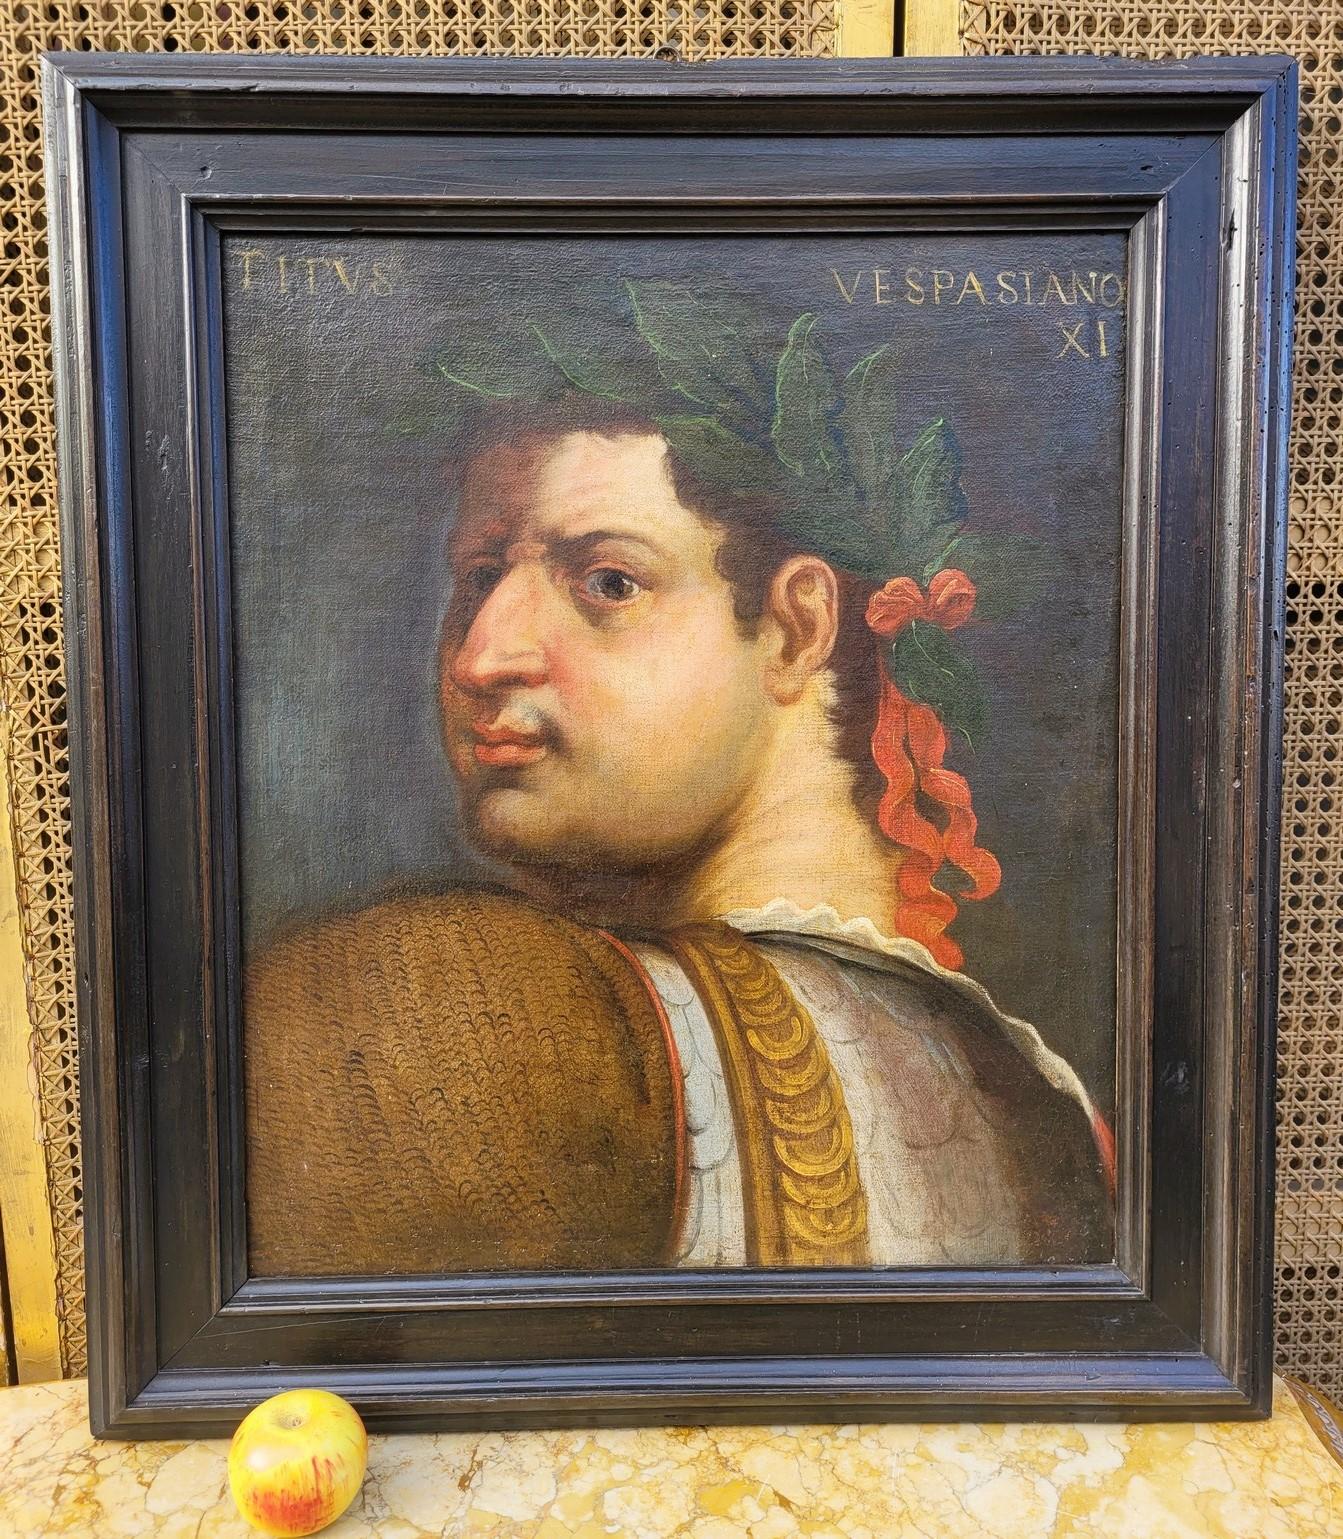 Portrait of Titus Vespasian XI, from behind but with his head crowned with laurels turned towards us

Oil on canvas 17th century, re-canvased on a recent stretcher, old restorations; old frame (wear)

Dimensions with frame: 82.5 x 72.5 cm
Dimensions